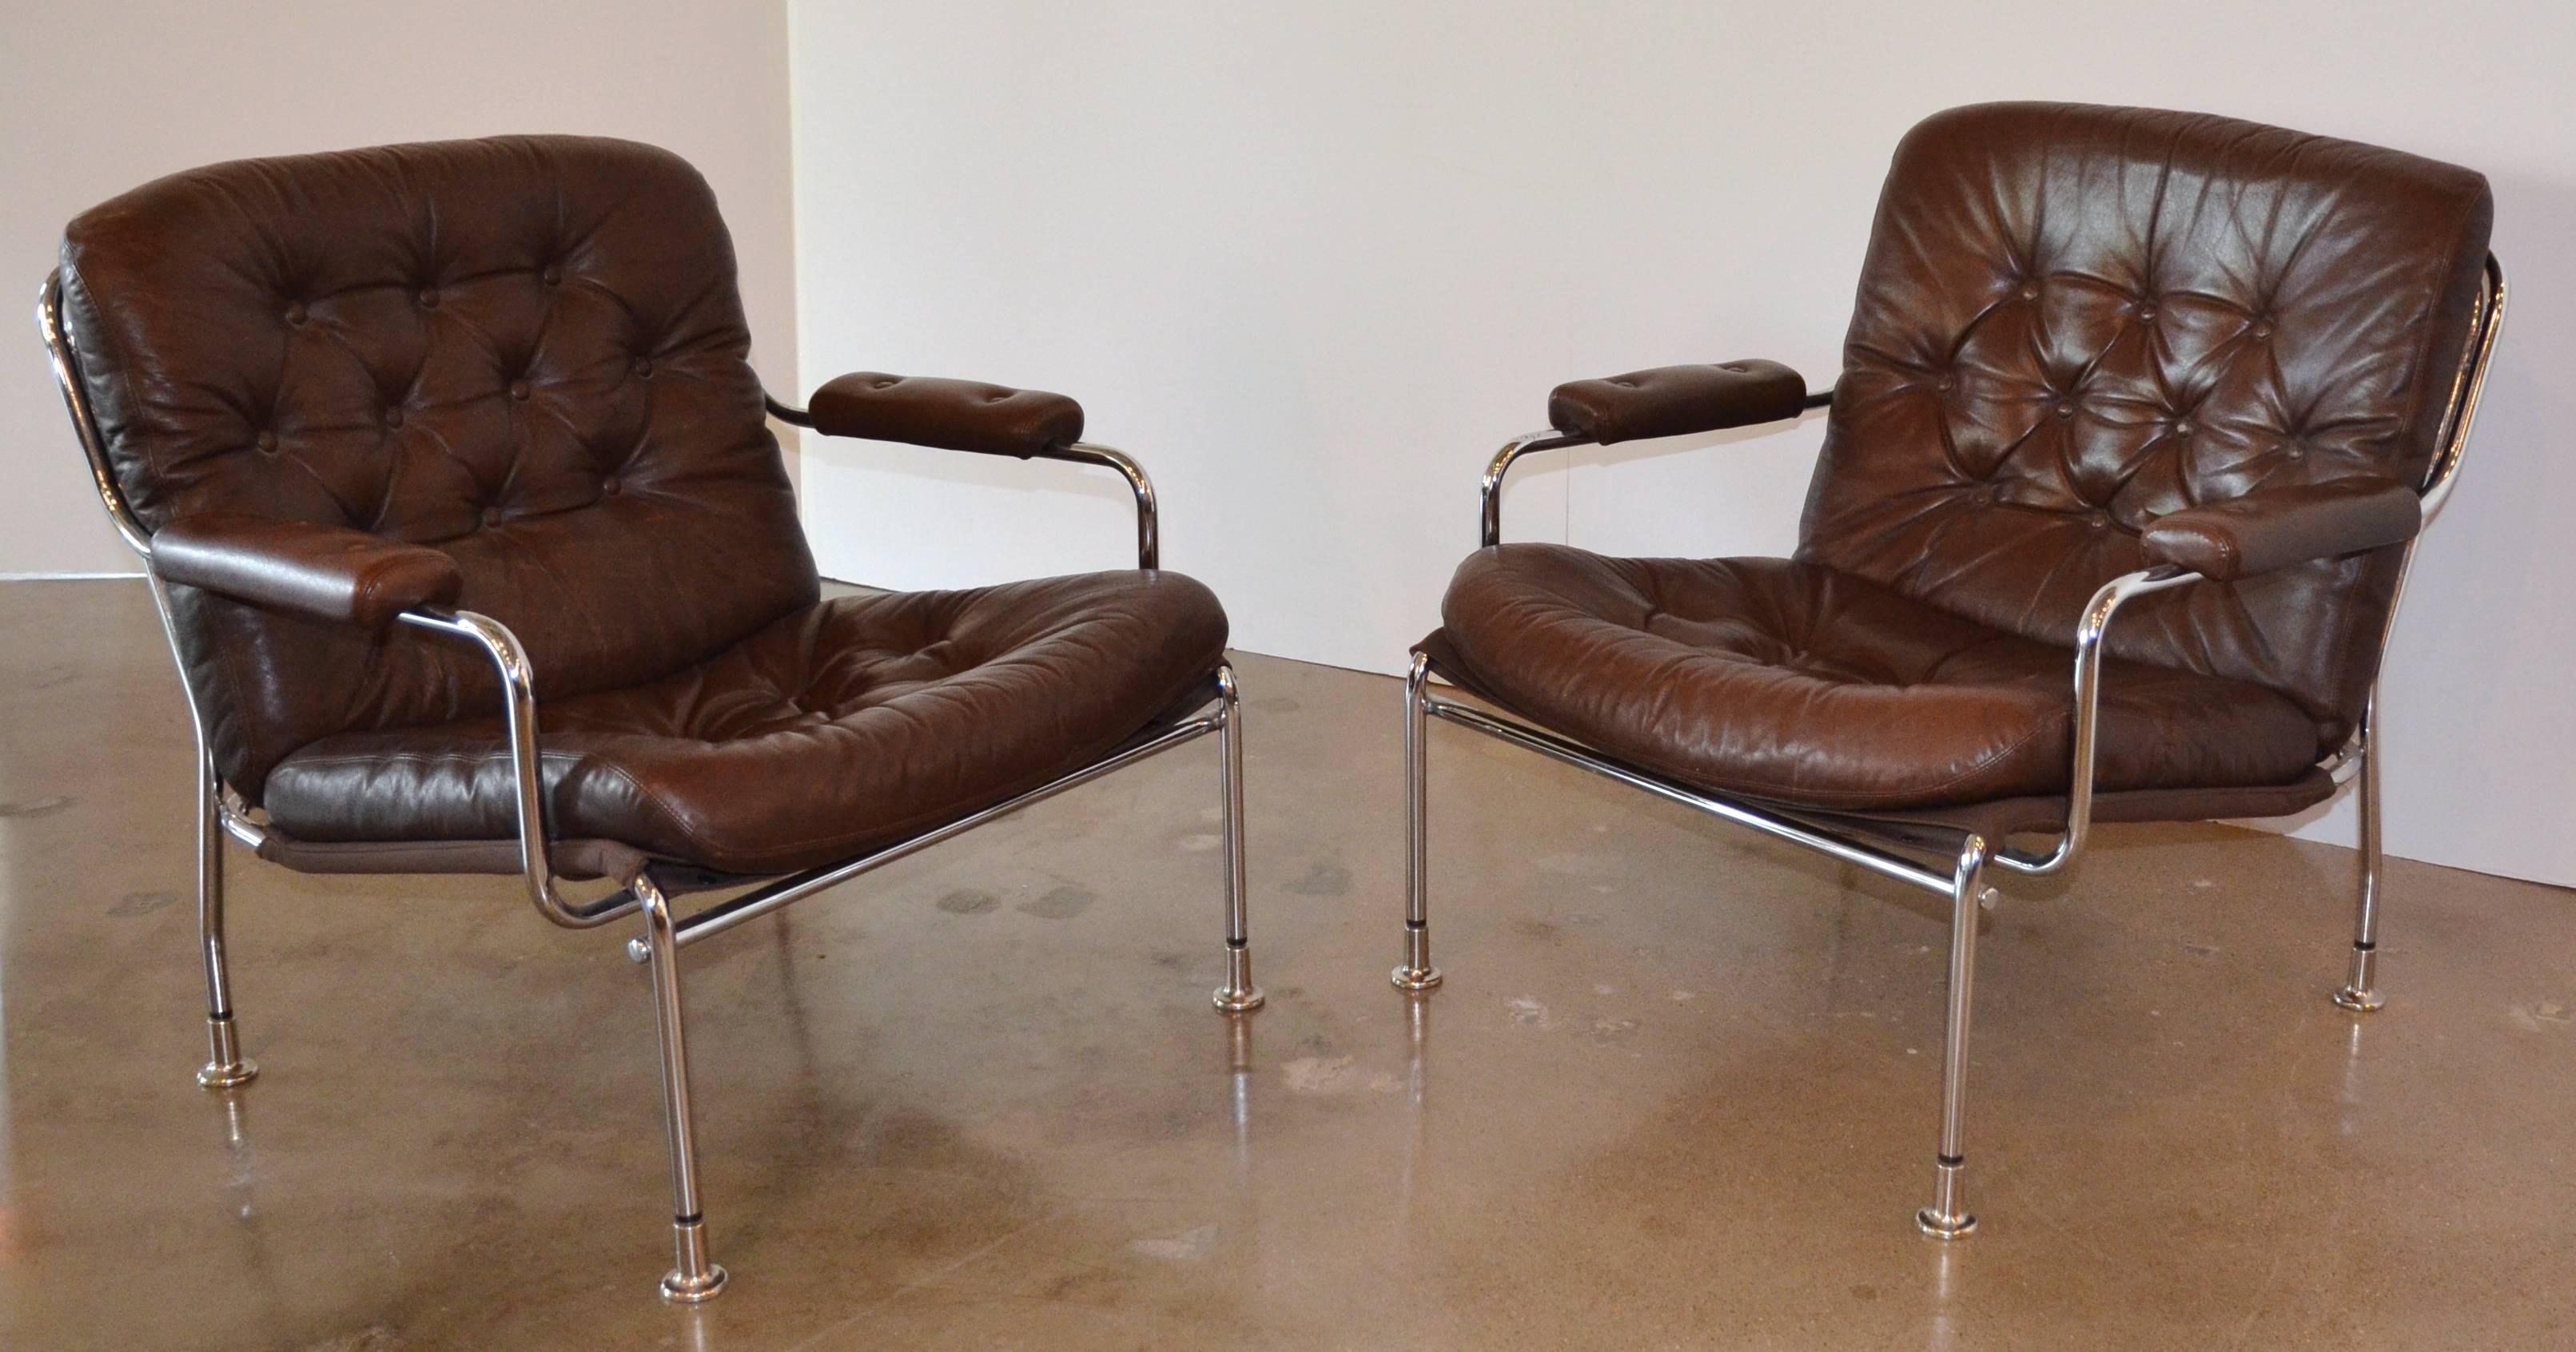 Scandinavian Modern Swedish Chrome and Leather Armchair Attributed to Bruno Mathsson for DUX